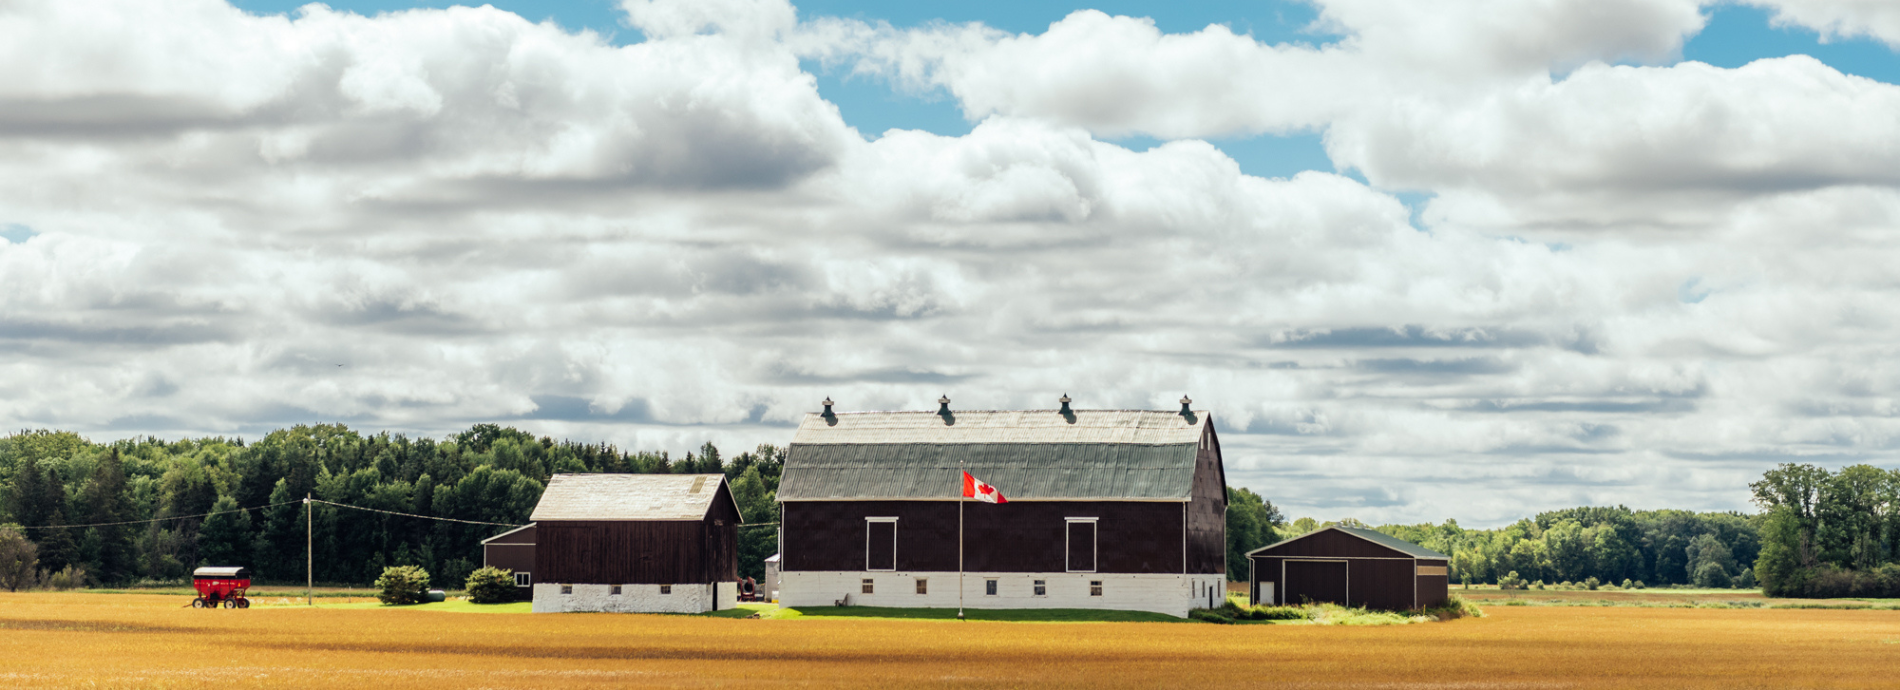 agricultural field and barn in summer